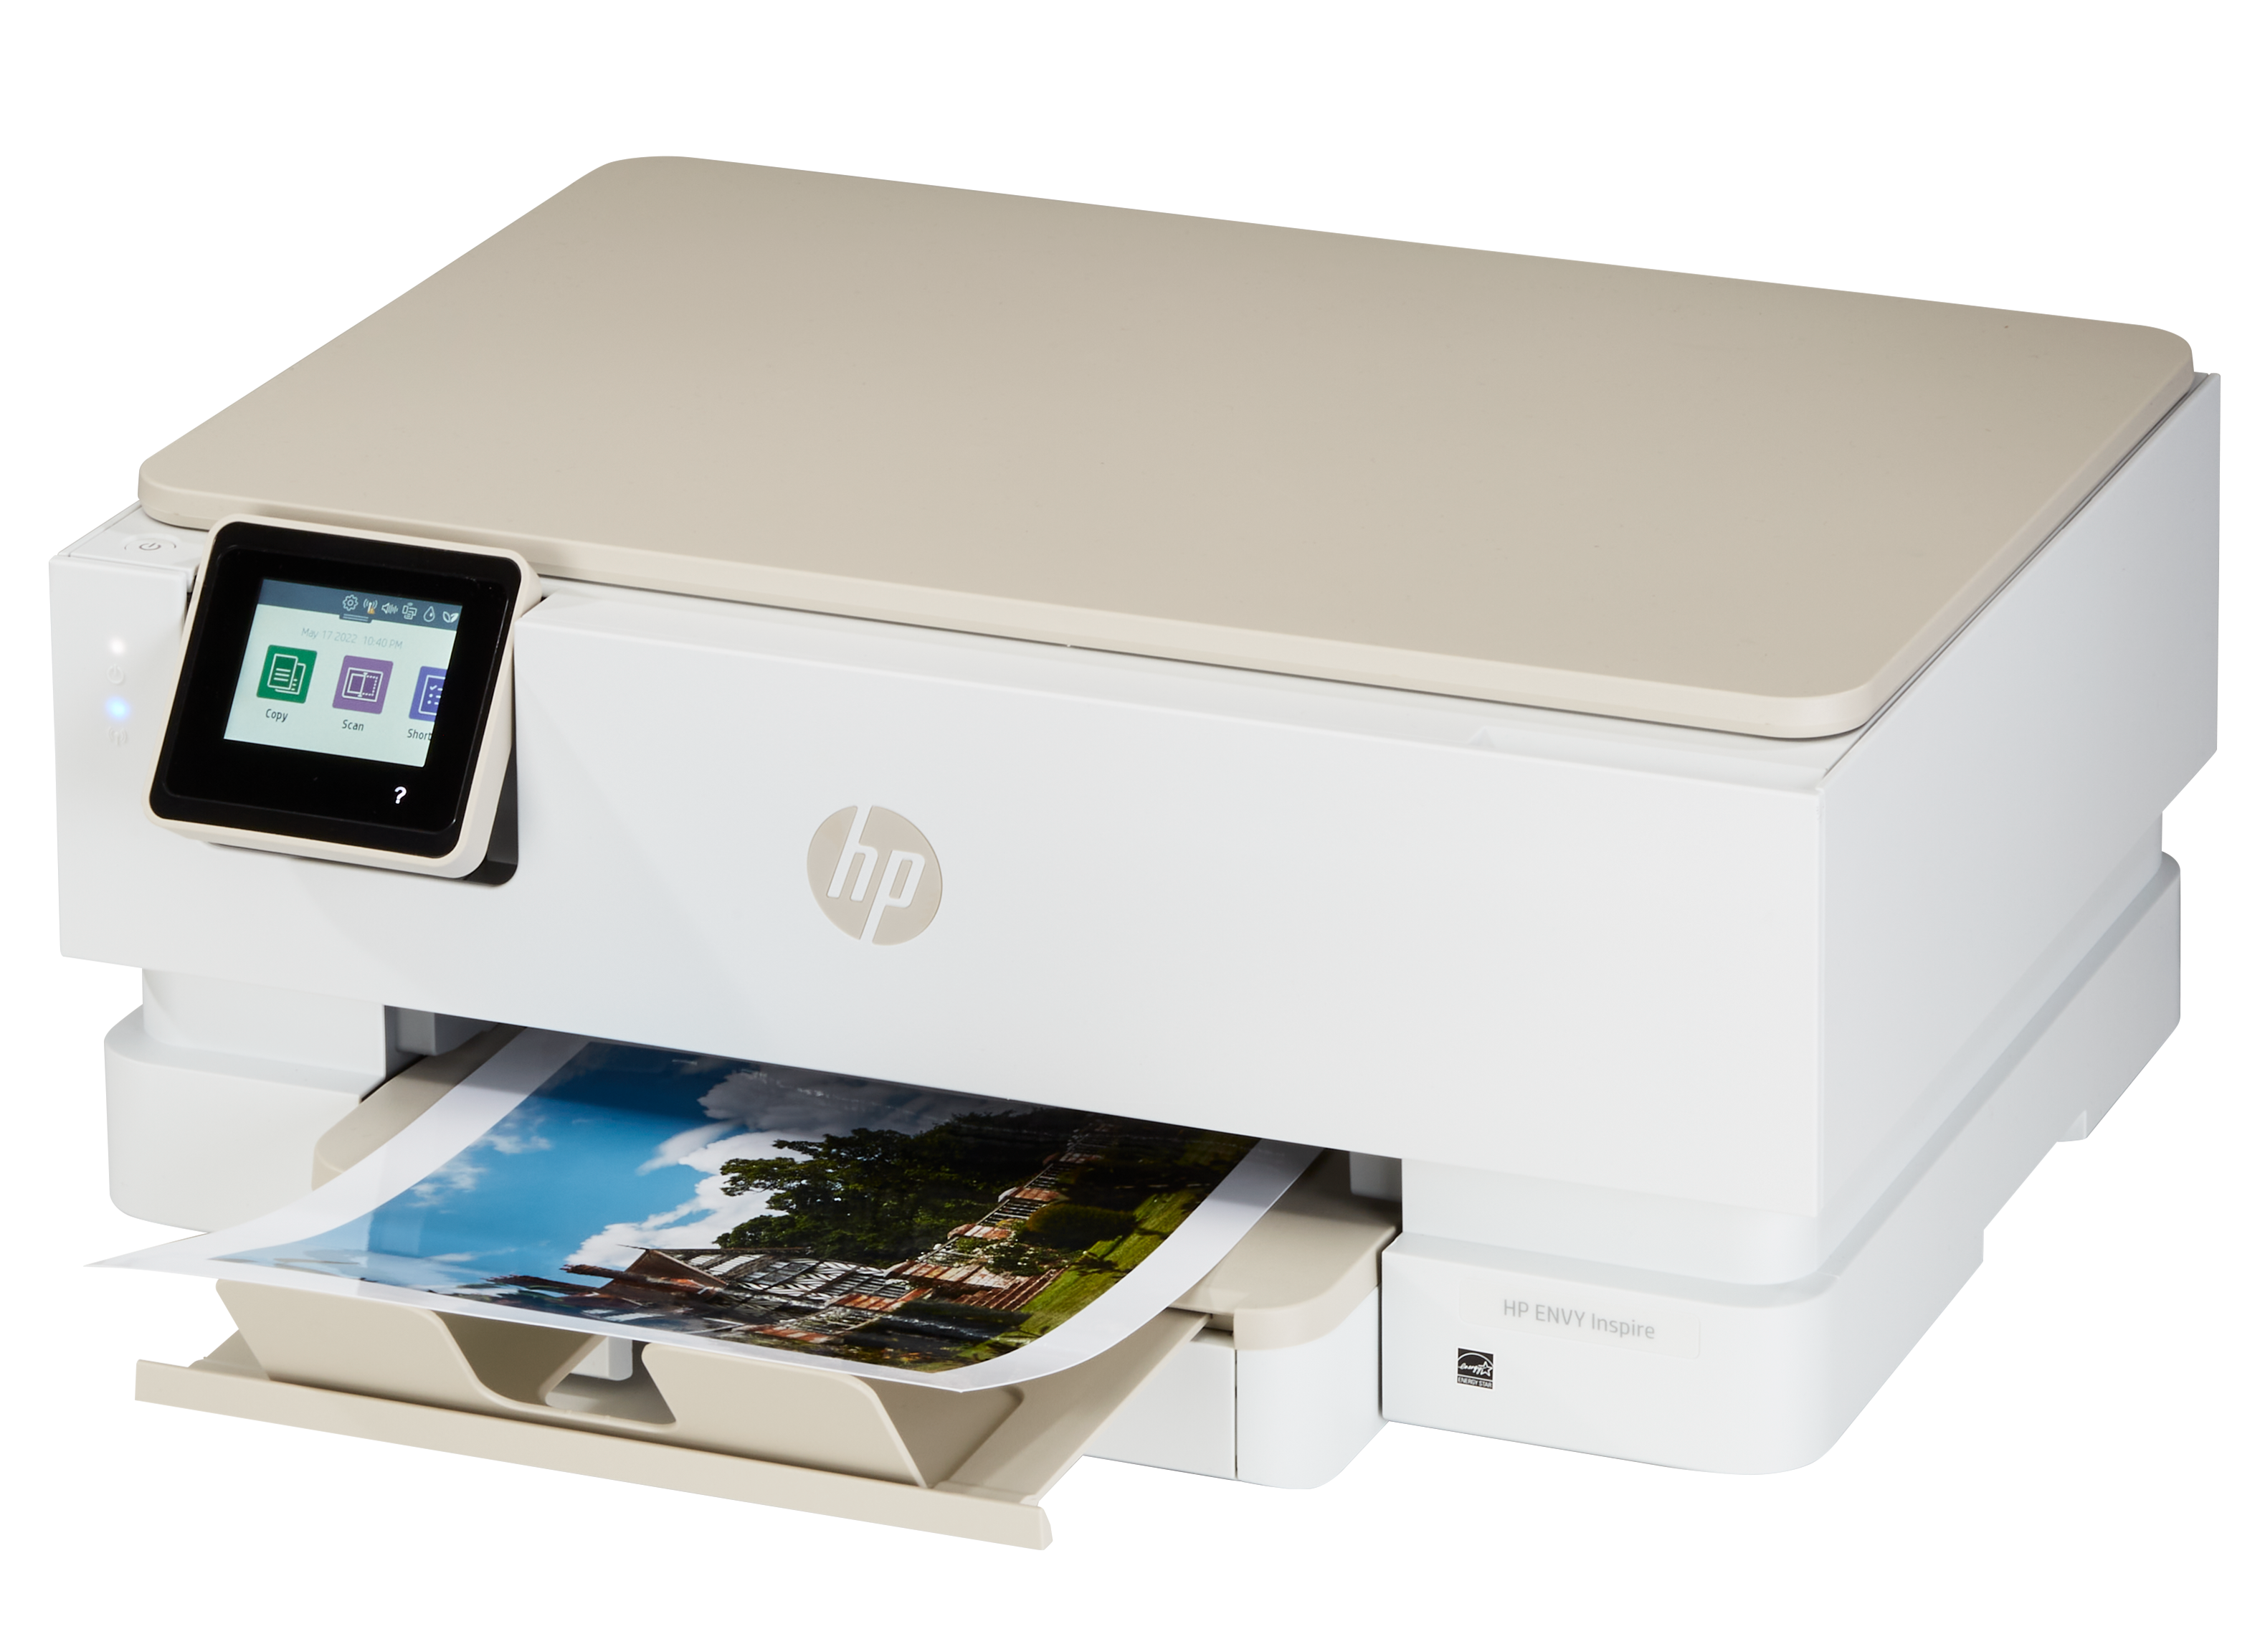 HP ENVY Inspire 7220e (2 stores) see best prices now »